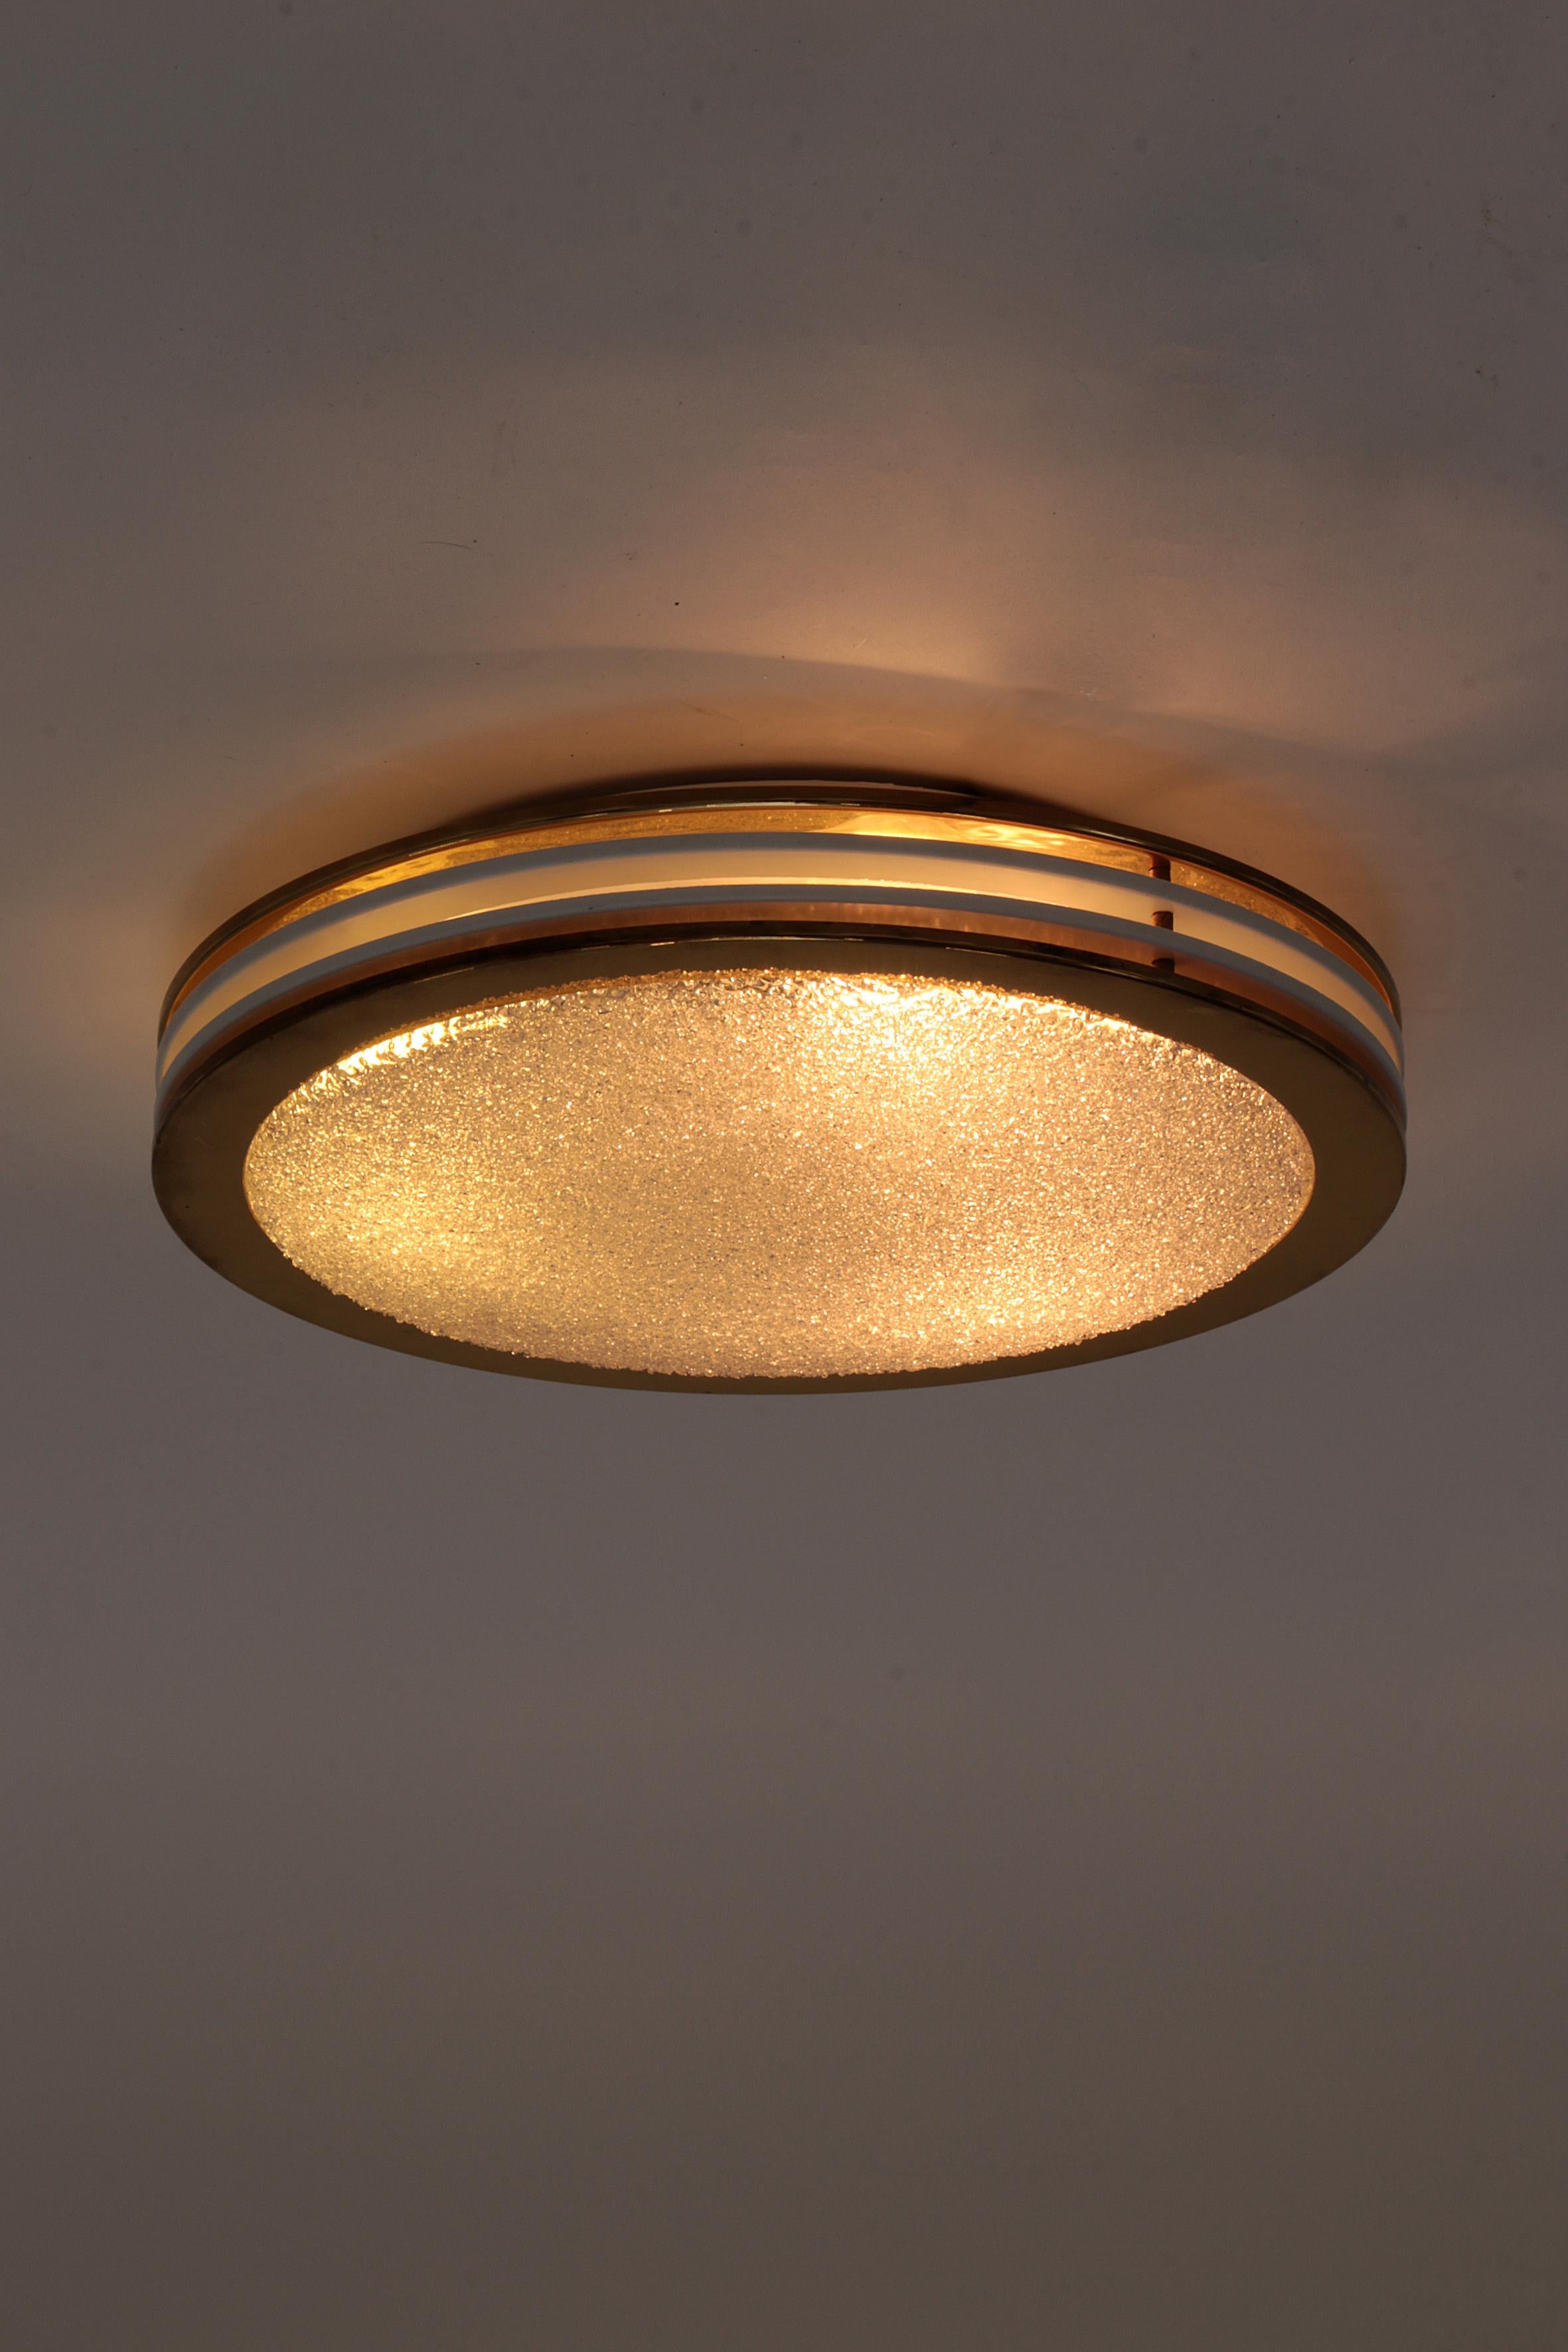 Vintage Plafonniere Doria leuchten with ice glass and metal, Germany 1960s.

Beautiful ceiling lamp made of 3 layers of metal, the rings are made of metal and the thick ice glass shade in the middle.

Are you looking for a beautiful lamp for your